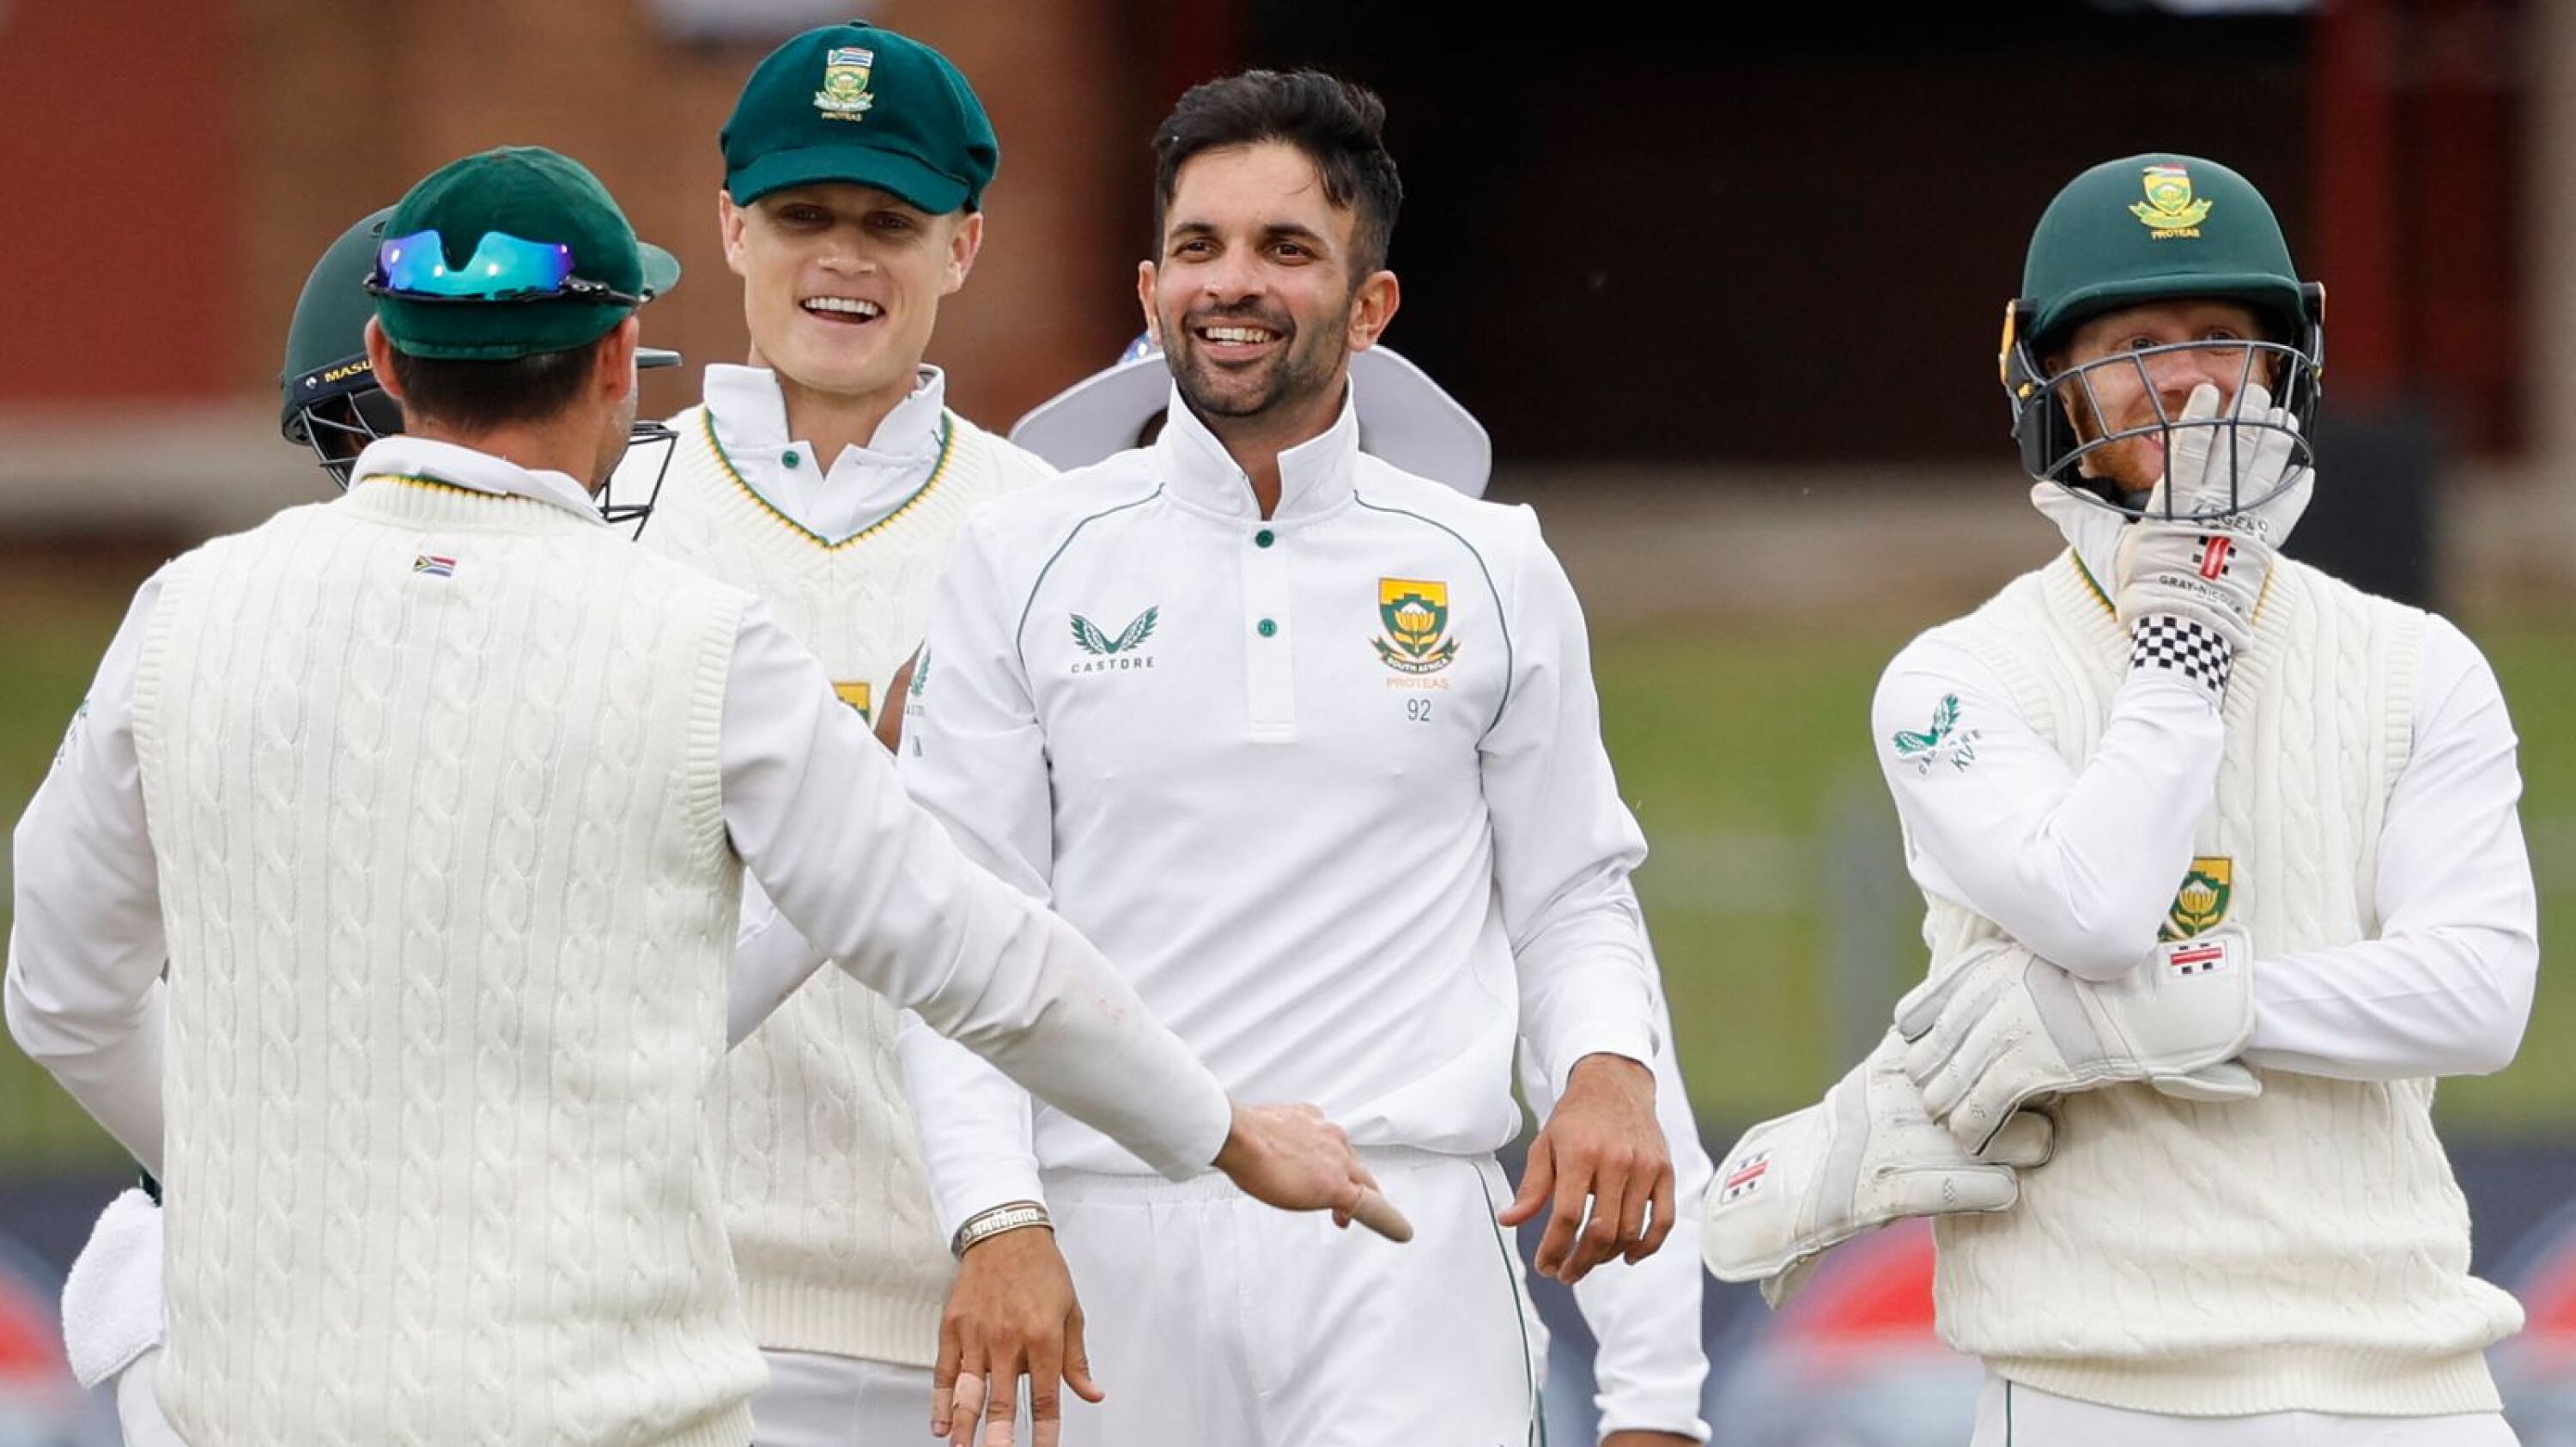 South Africa's Keshav Maharaj celebrates with teammates after the dismissal of Bangladesh's Yasir Ali (not seen) during the third day of the second Test cricket match at St George's Park in Gqeberha on Sunday